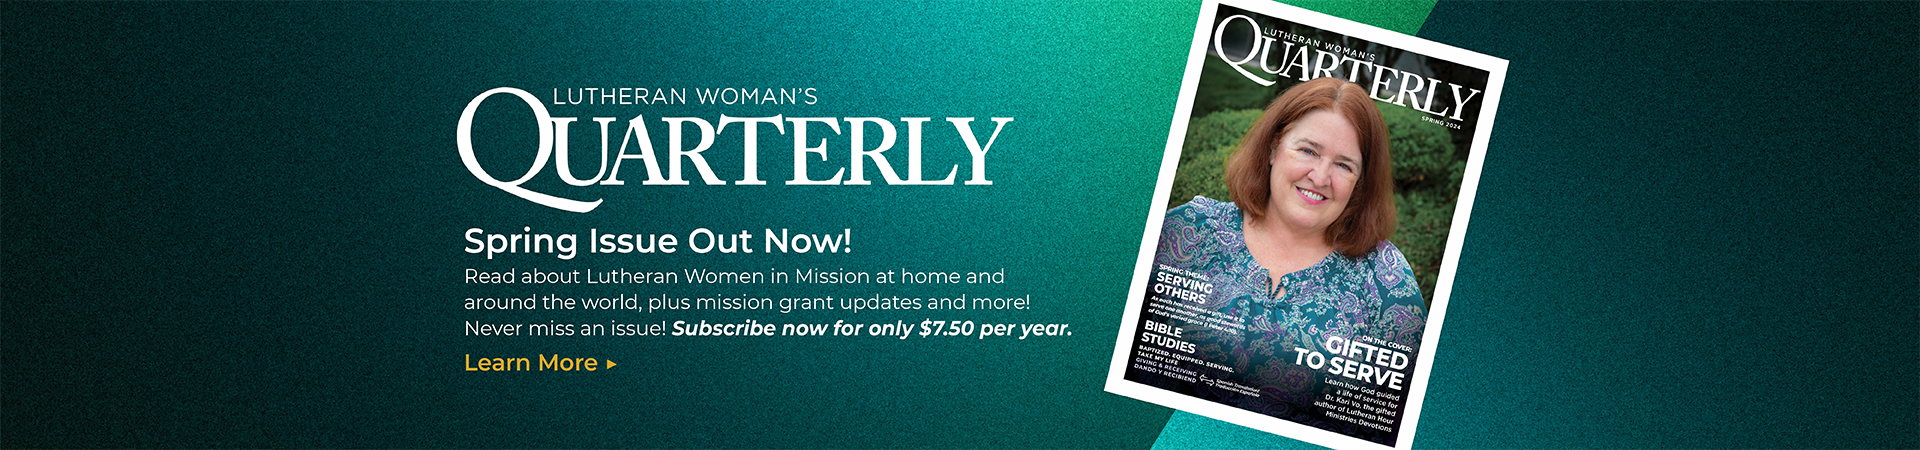 Lutheran Woman's Quarterly Spring issue out now! Learn More.